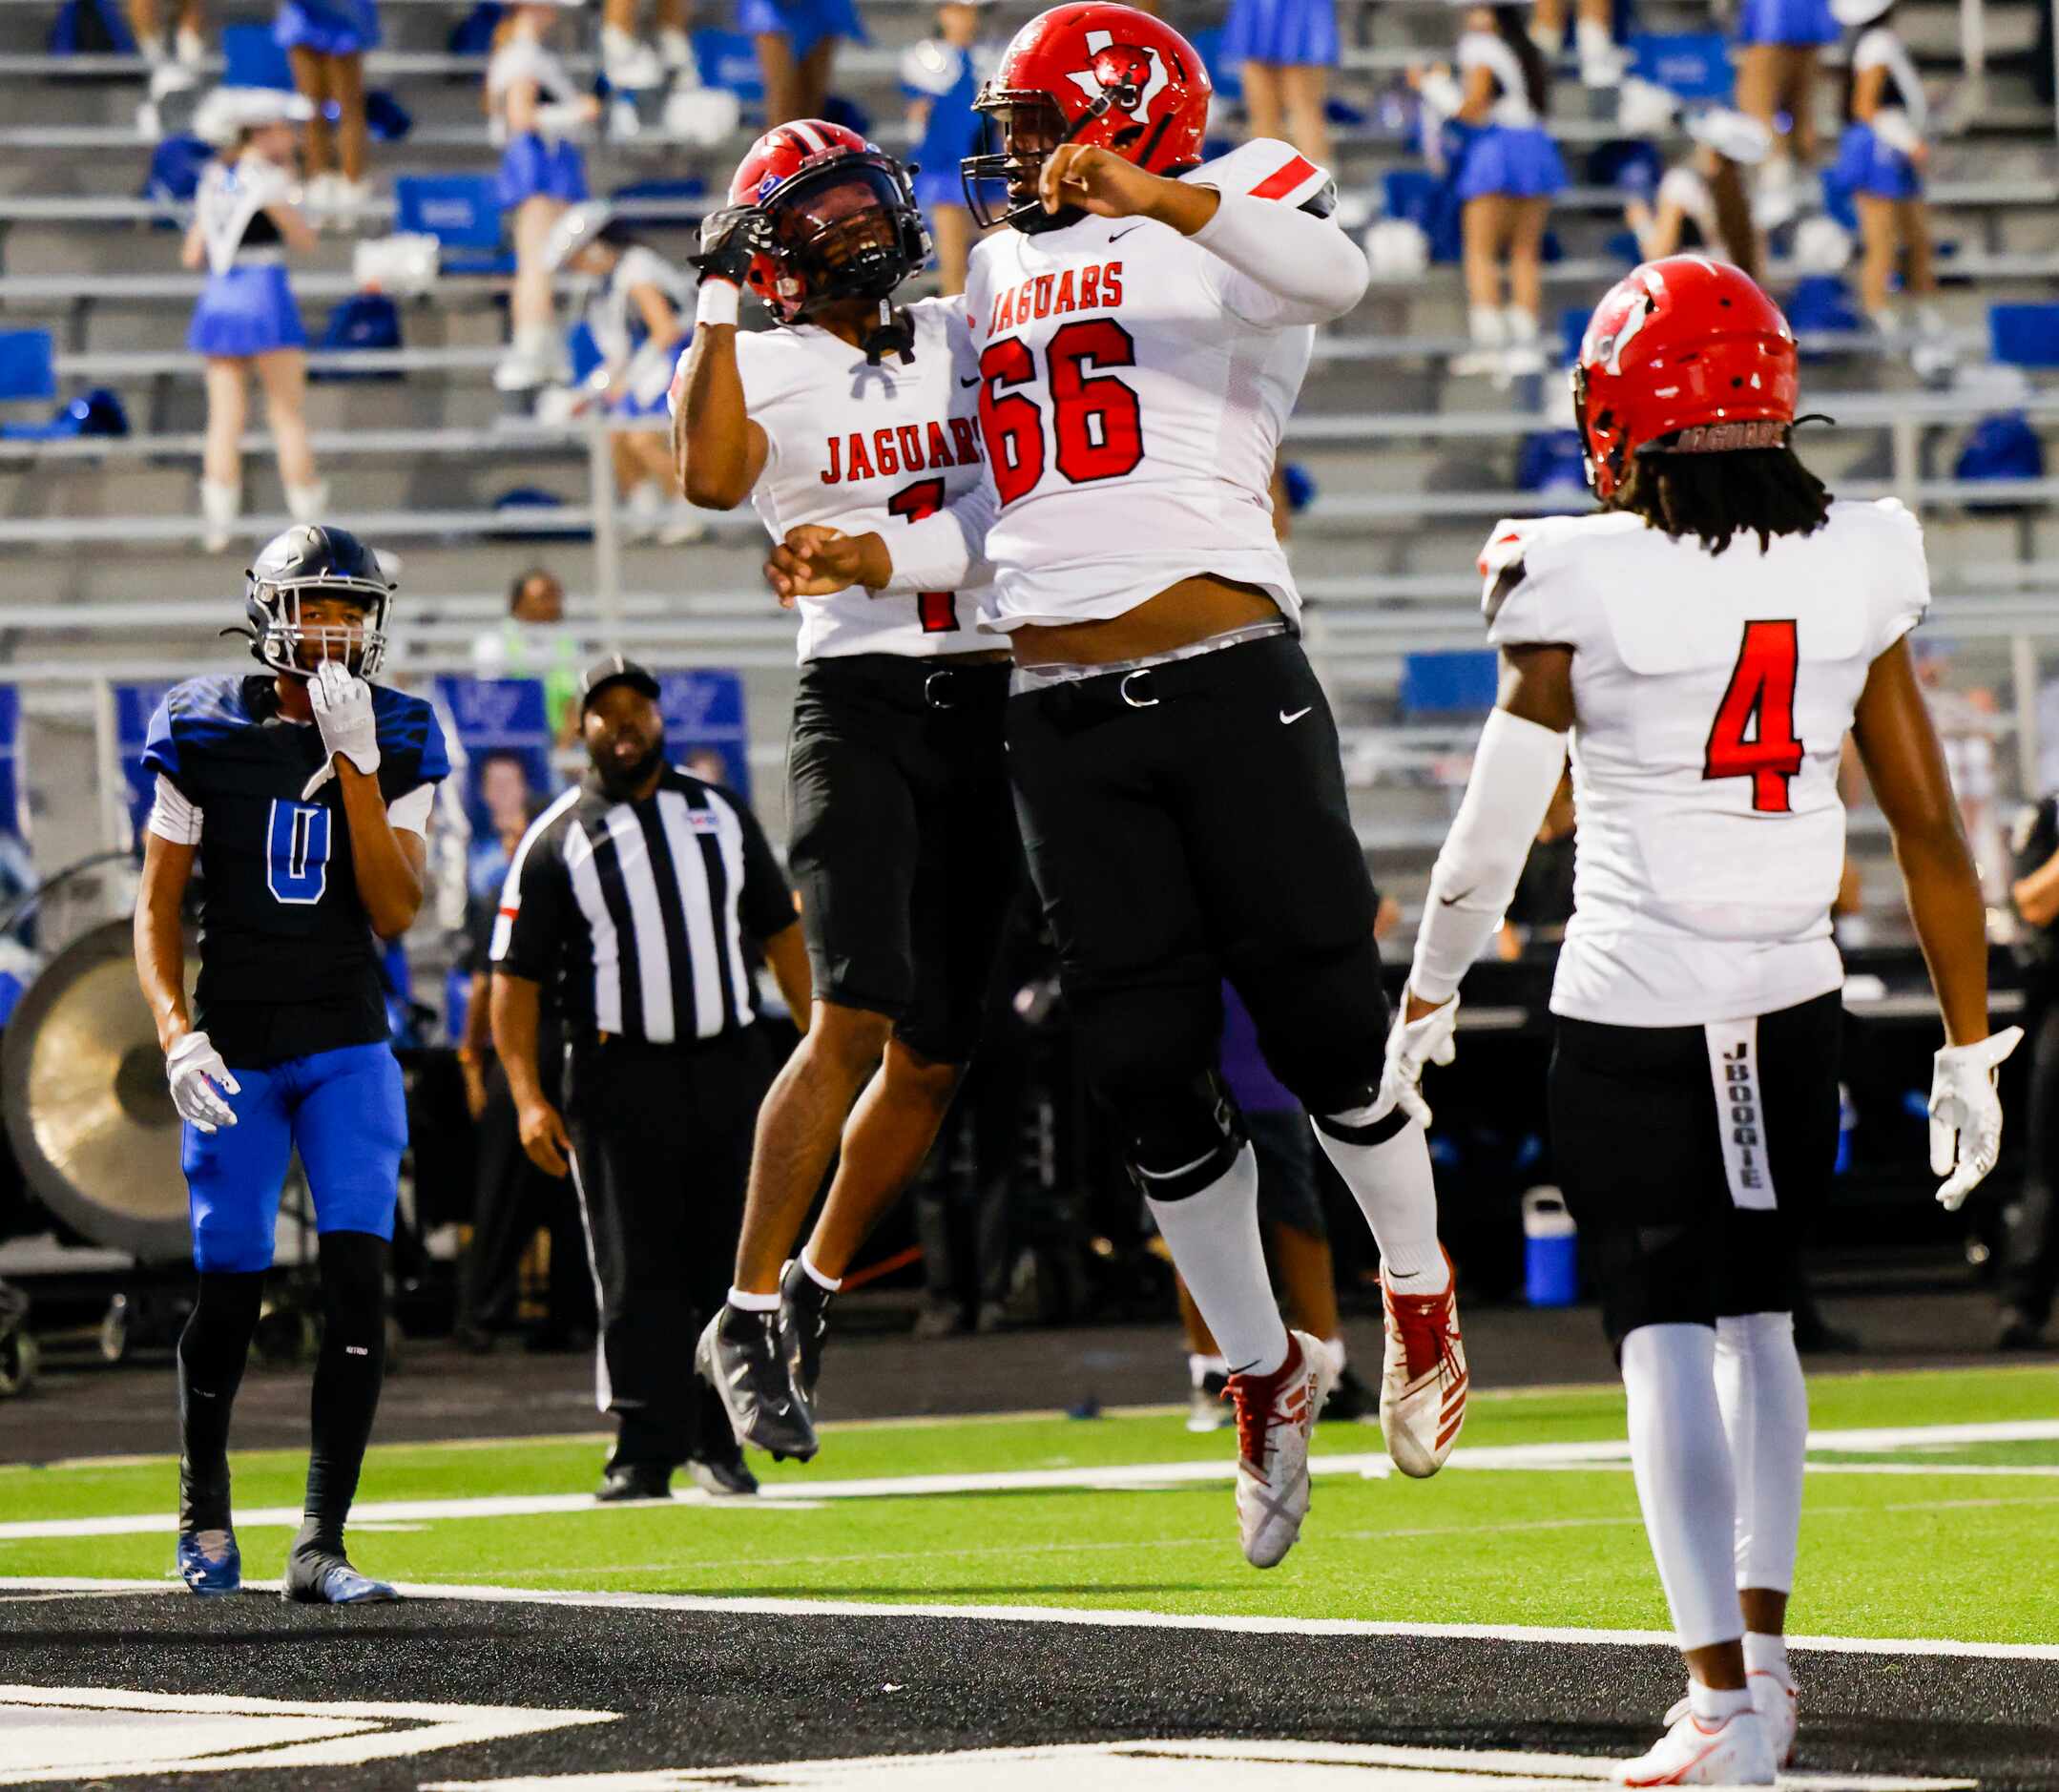 Mesquite Horn’s wide receiver Chris Dawn (1) celebrates catching a touchdown pass against...